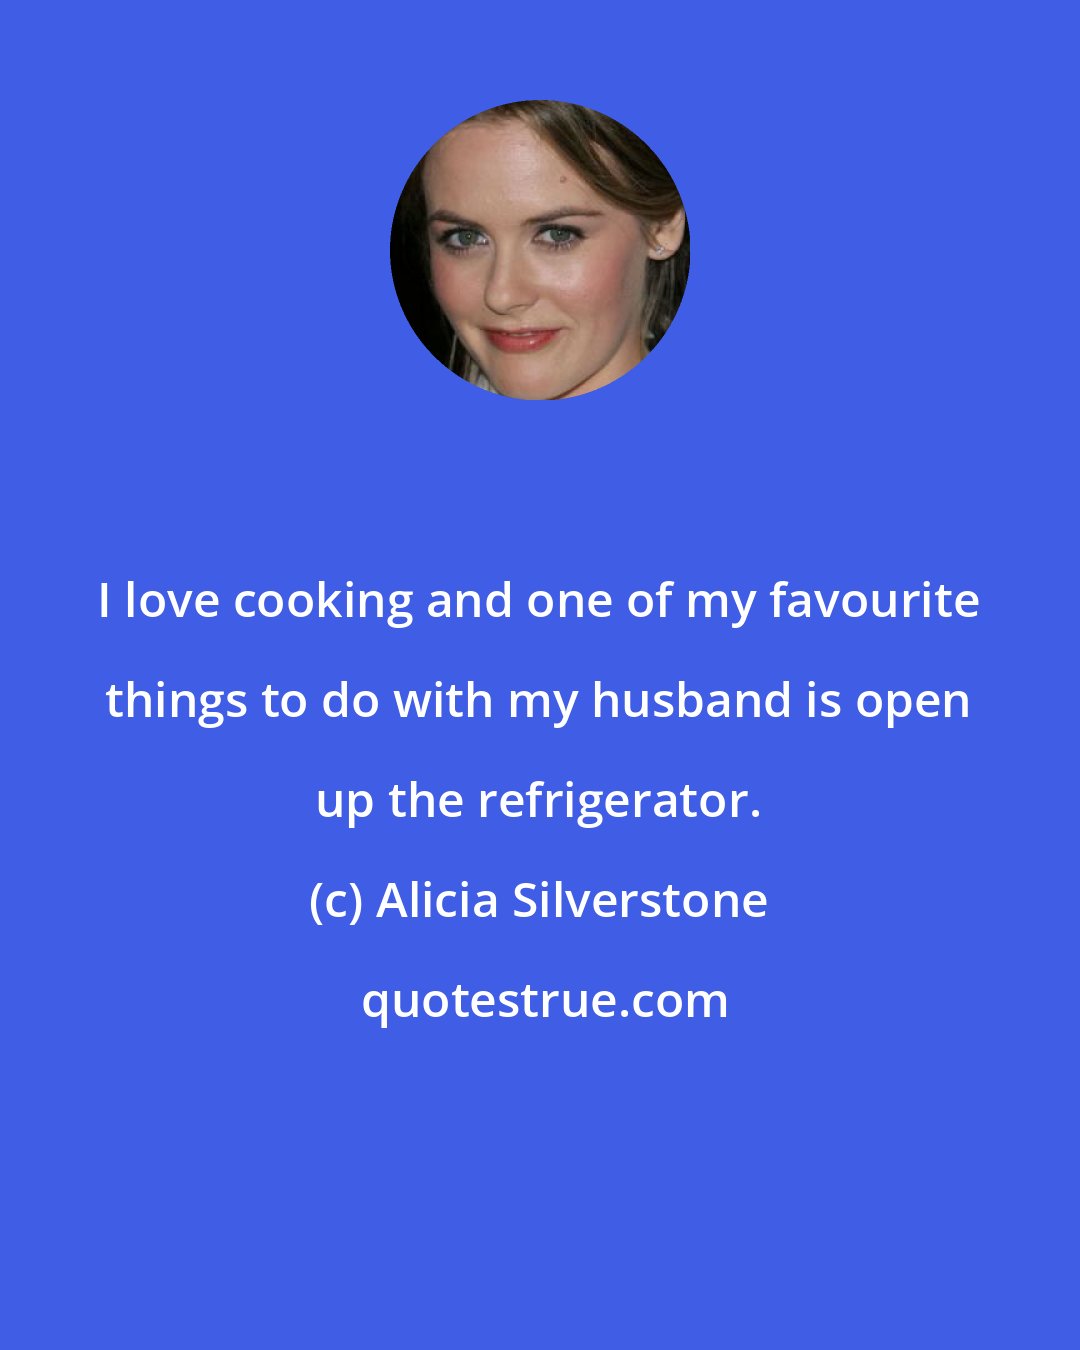 Alicia Silverstone: I love cooking and one of my favourite things to do with my husband is open up the refrigerator.